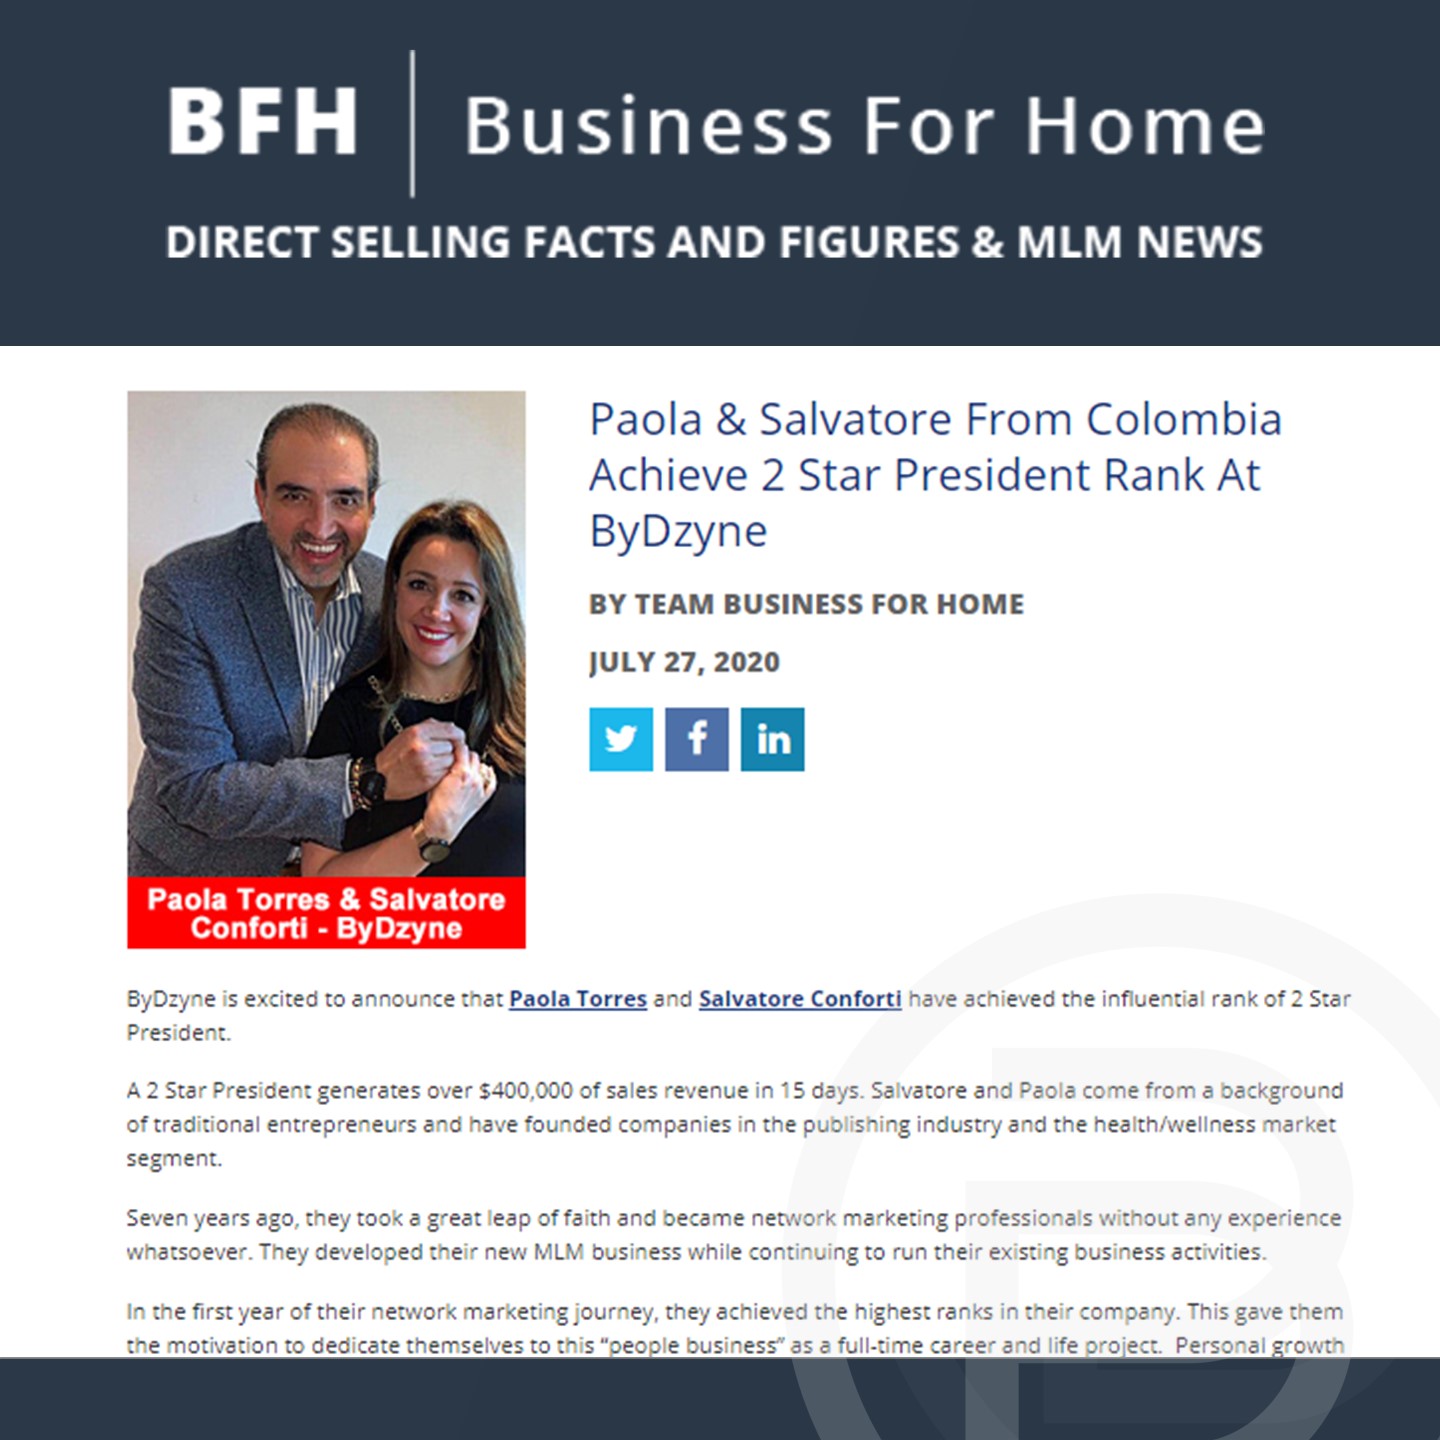 BFH: Paola & Salvatore From Colombia Achieve 2 Star President Rank At ByDzyne